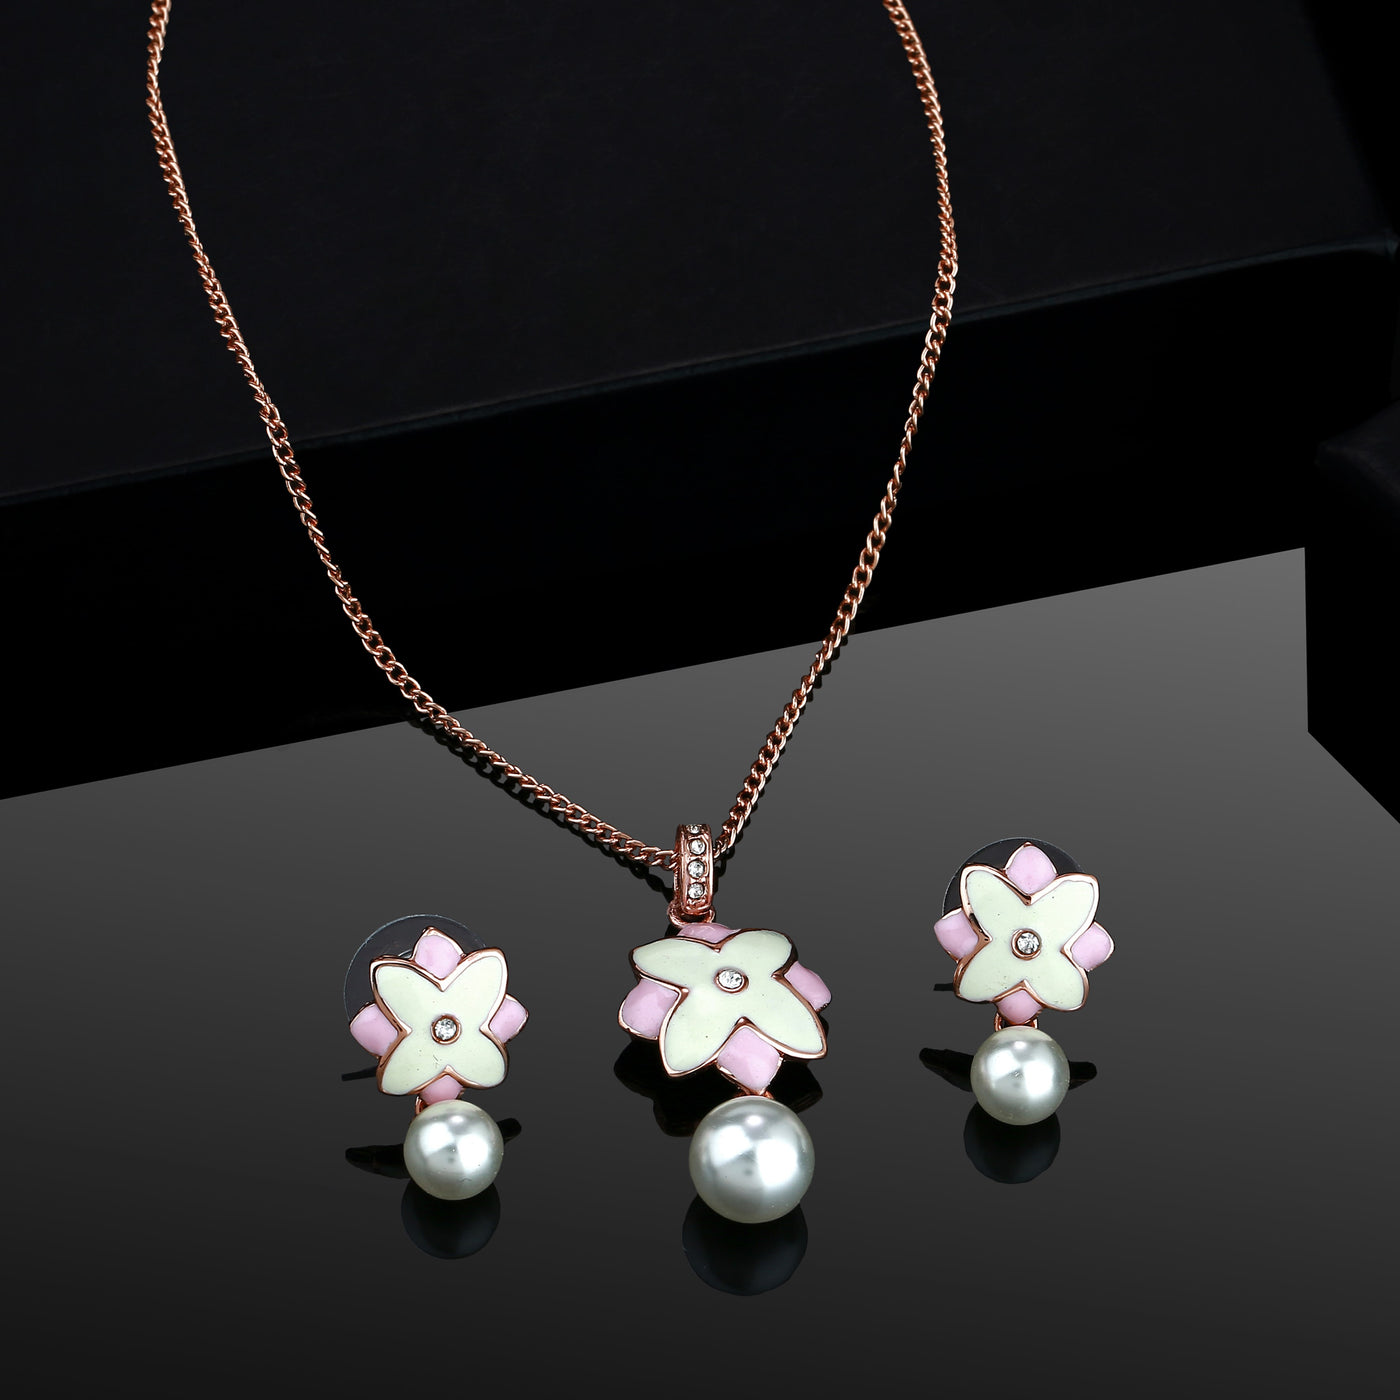 Estele Charming Rosegold Plated Floral Shaped Pearl Drop Pendant Set for Women / Girls